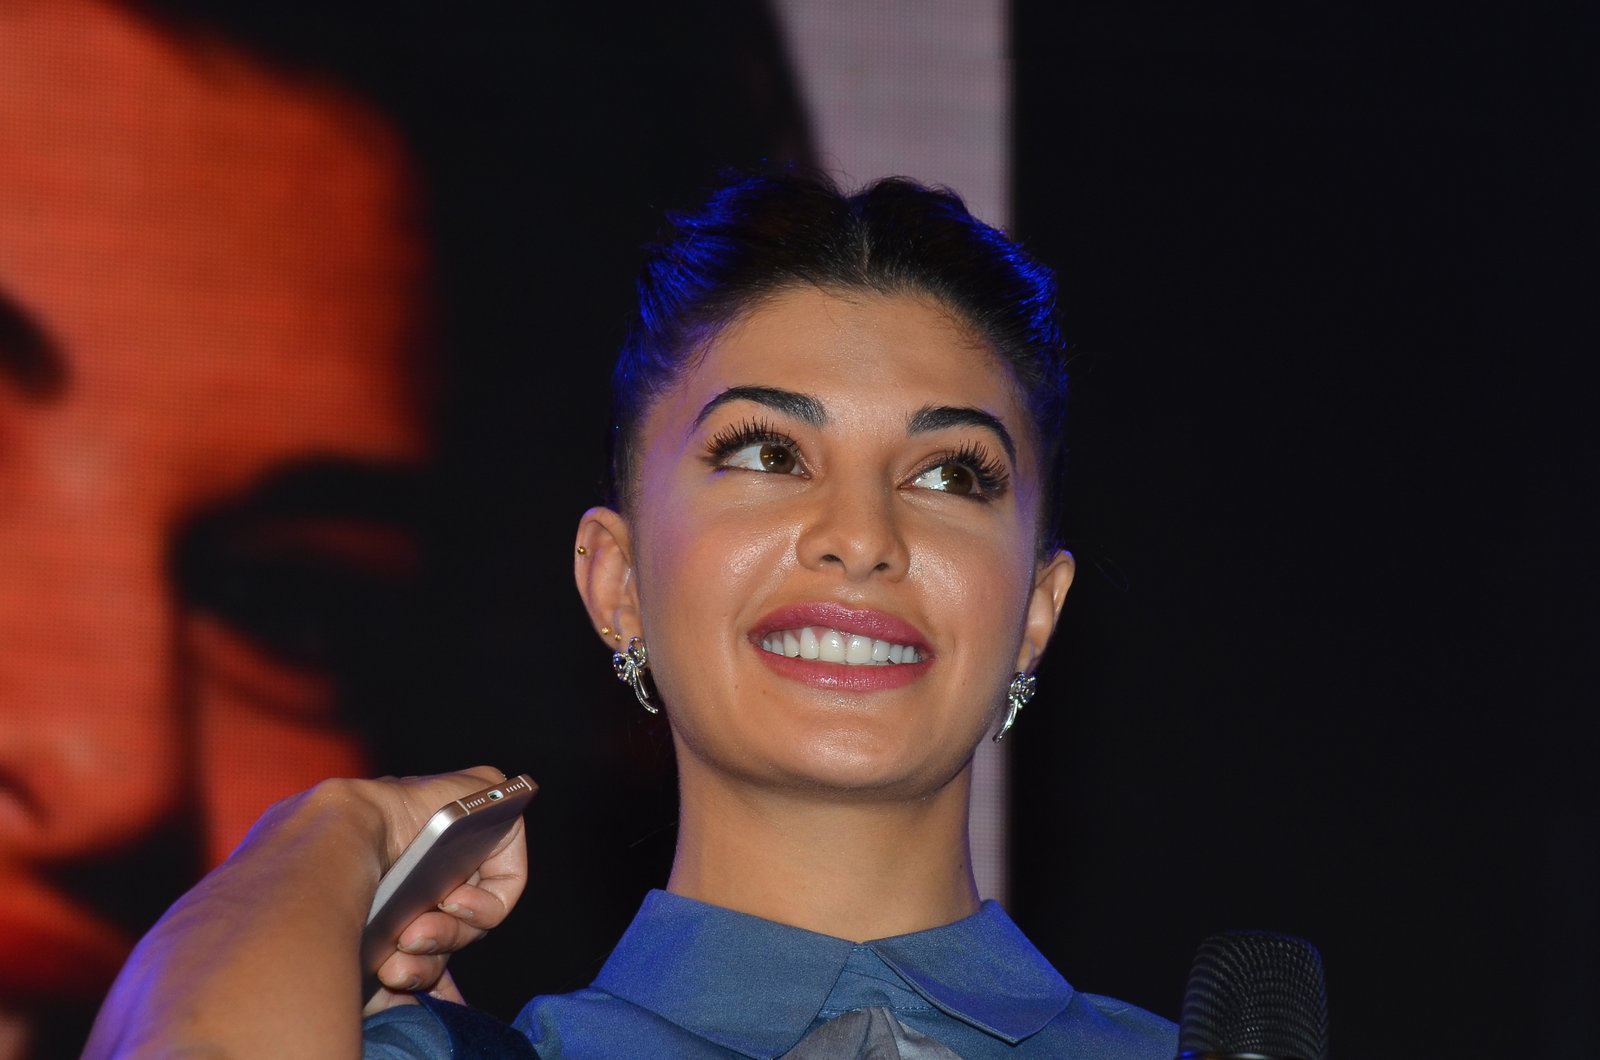 Jacqueline Fernandez Looks Smoking Hot At The Launch Event of LeEco Smartphones In Mumbai